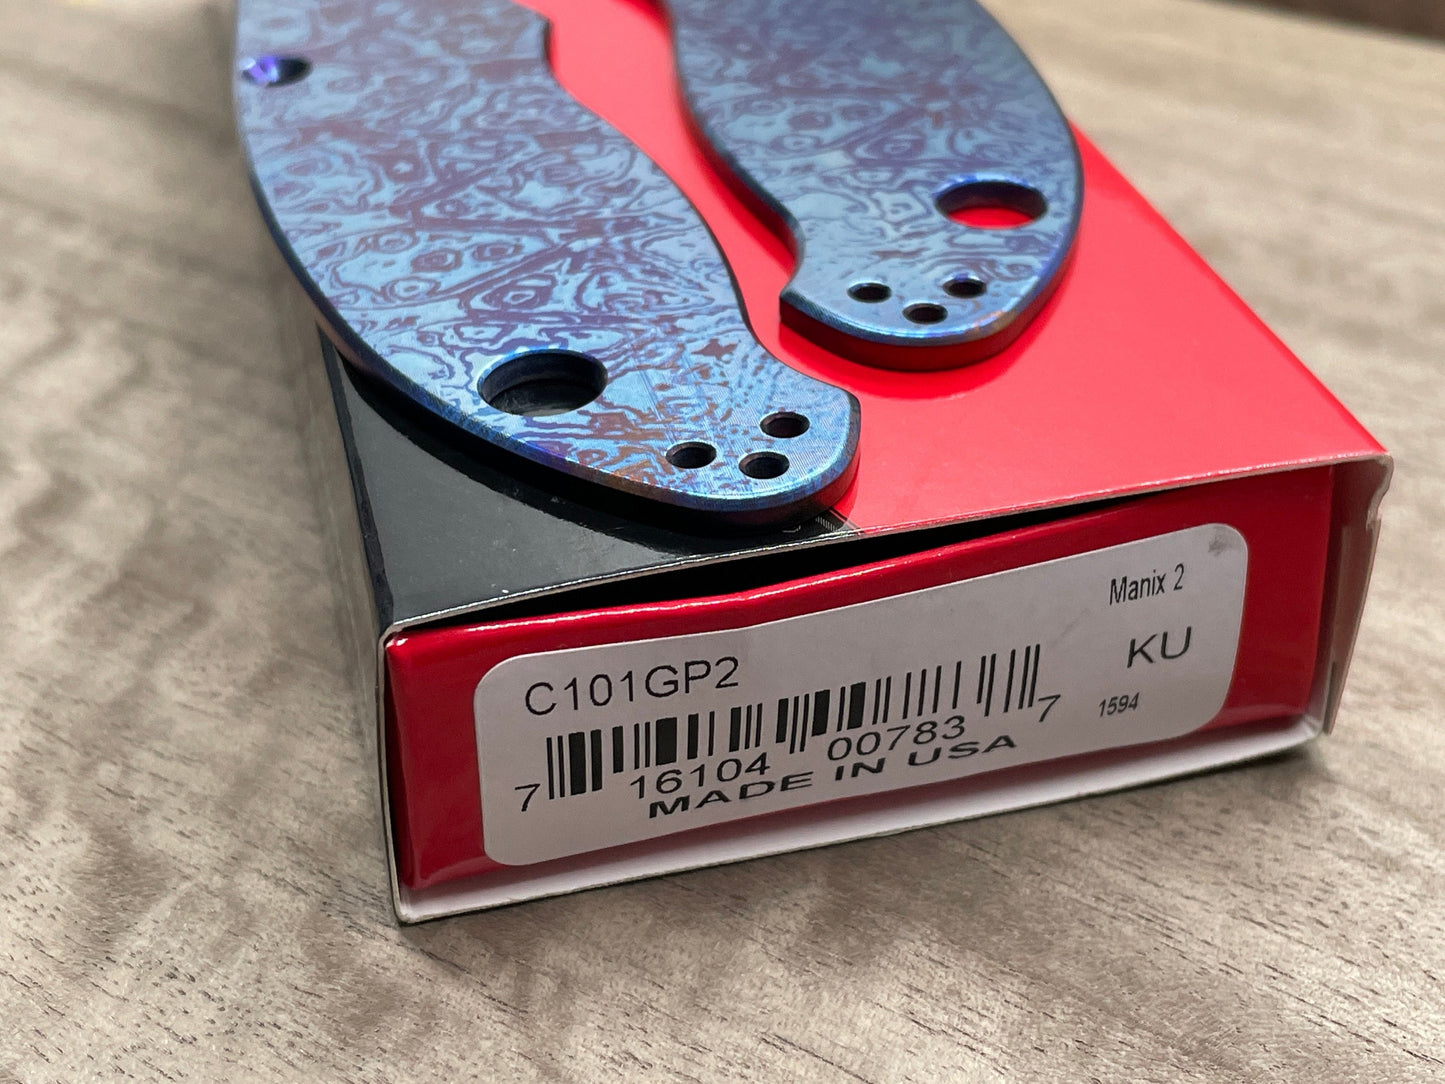 REPTILIAN engraved Brass scales for Spyderco MANIX 2